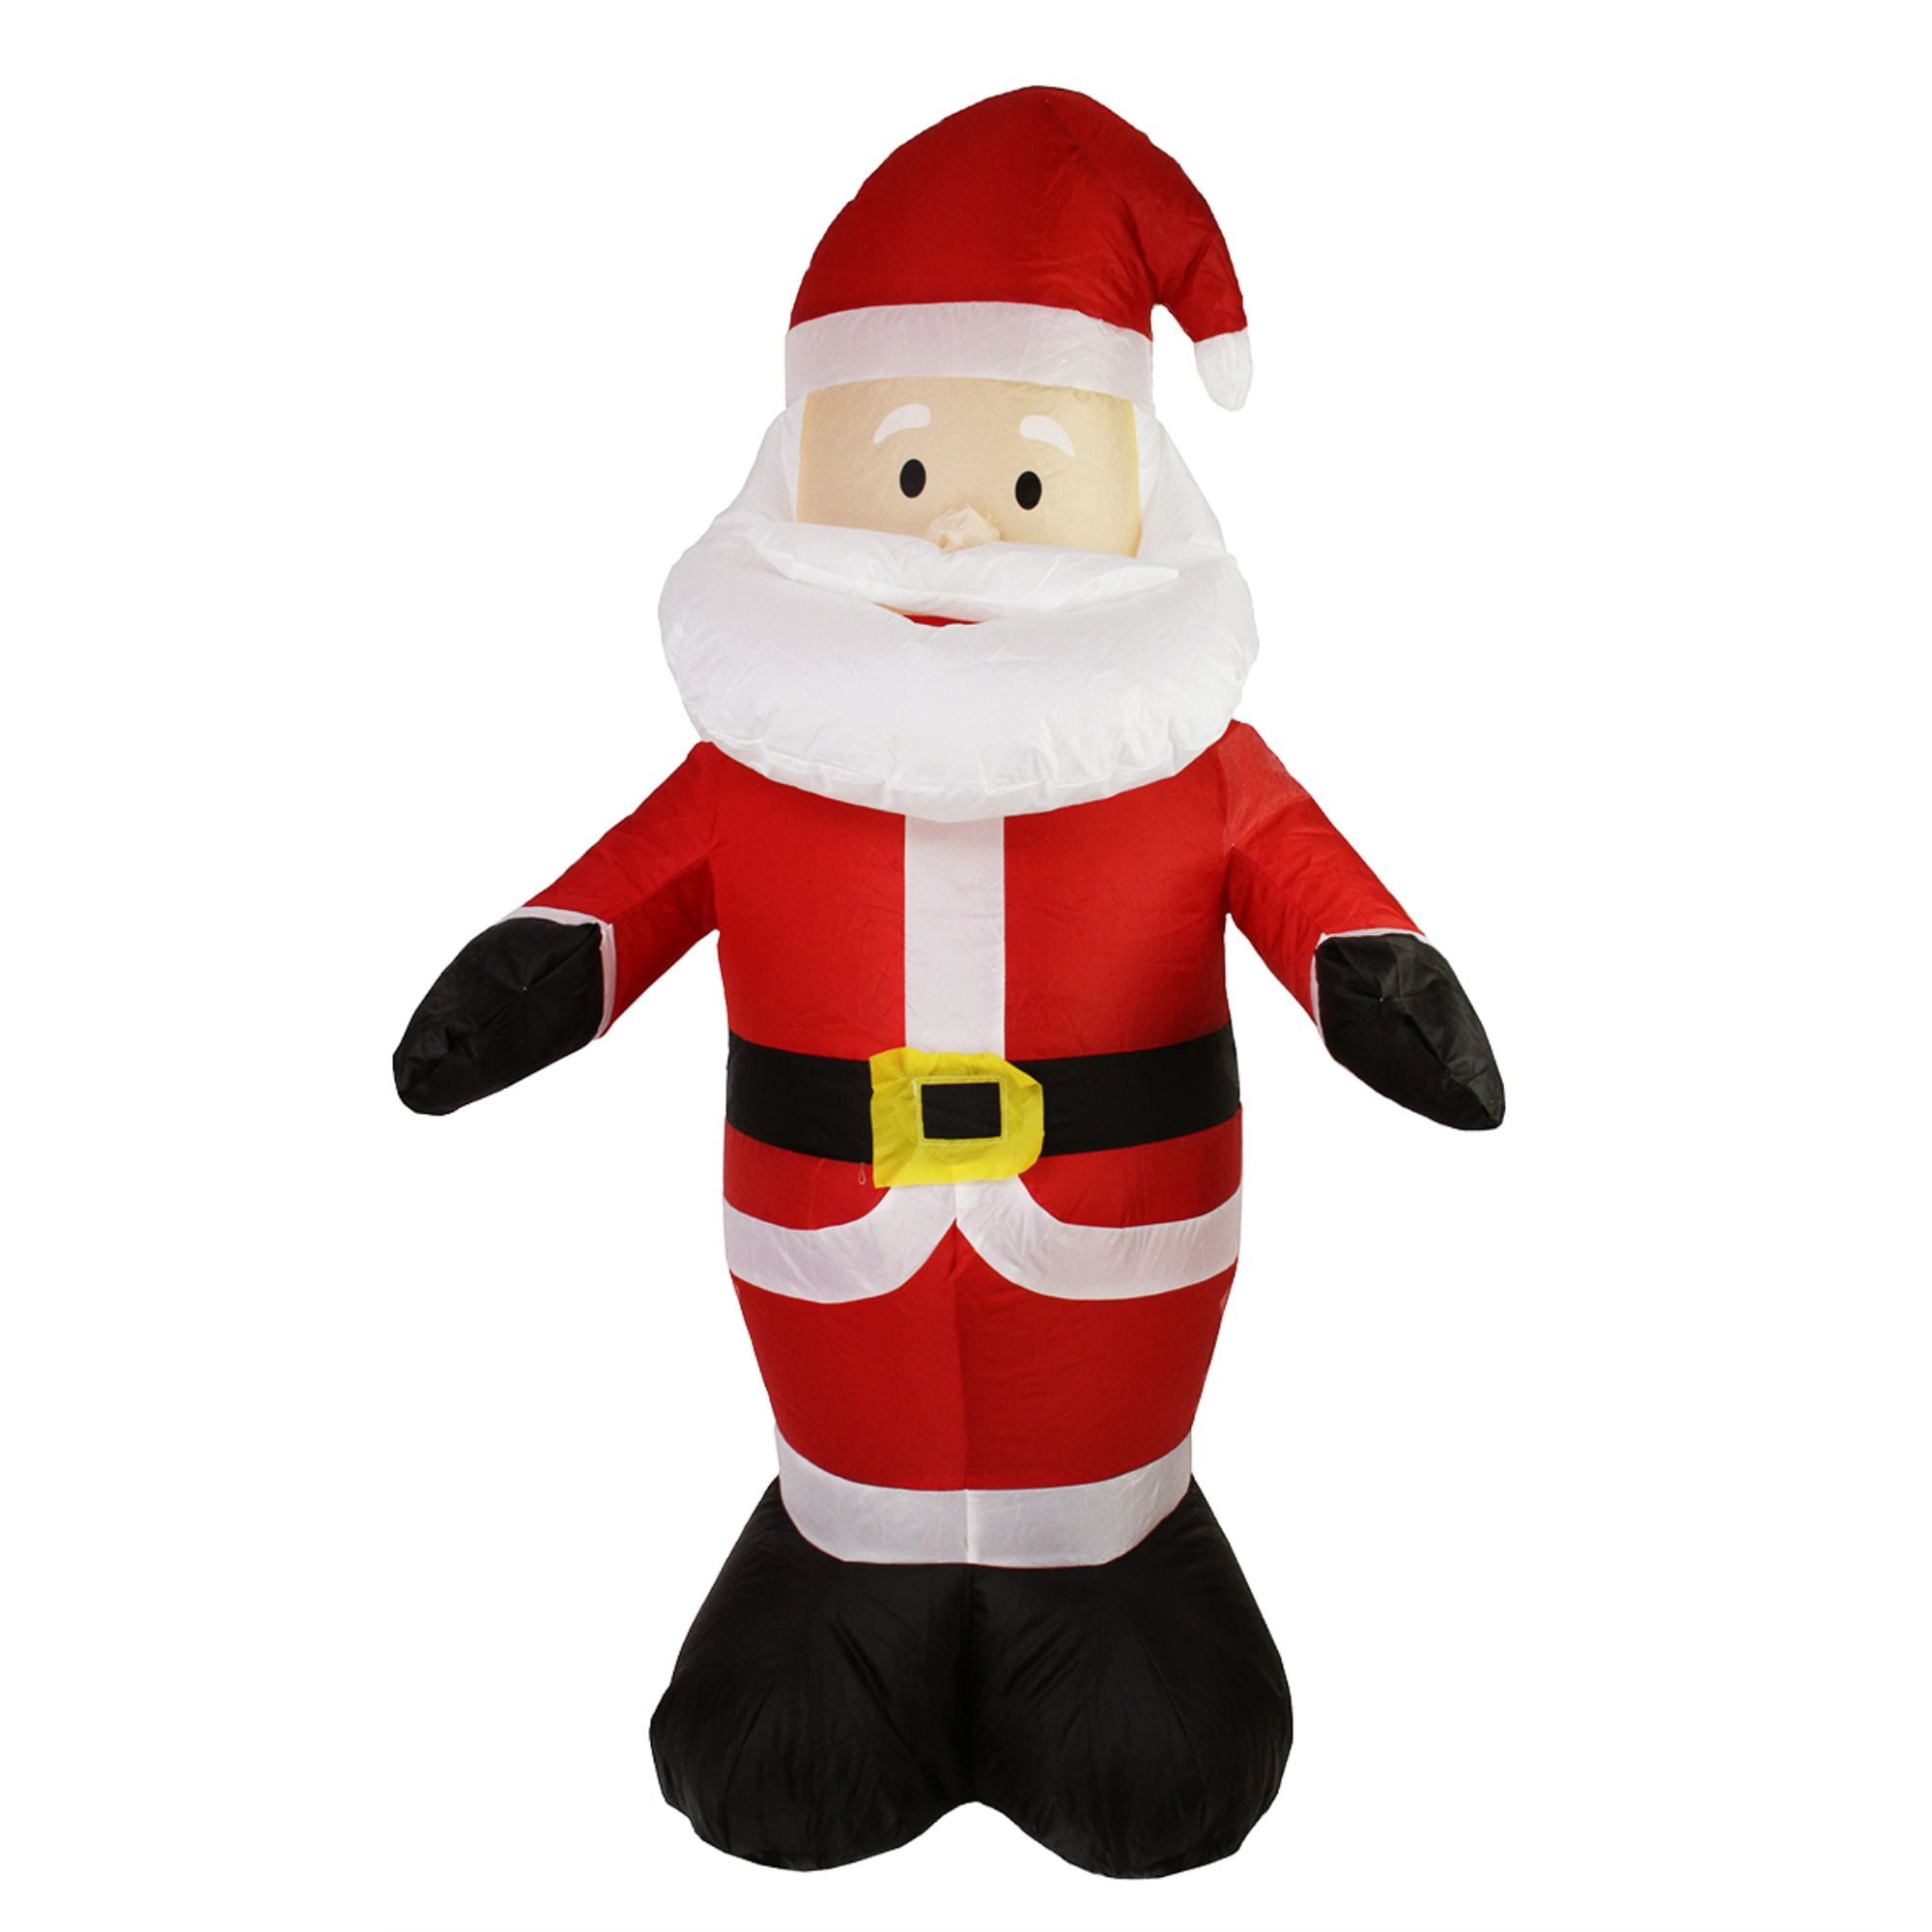 48" Red and White Inflatable Santa Claus LED Lighted Christmas Outdoor